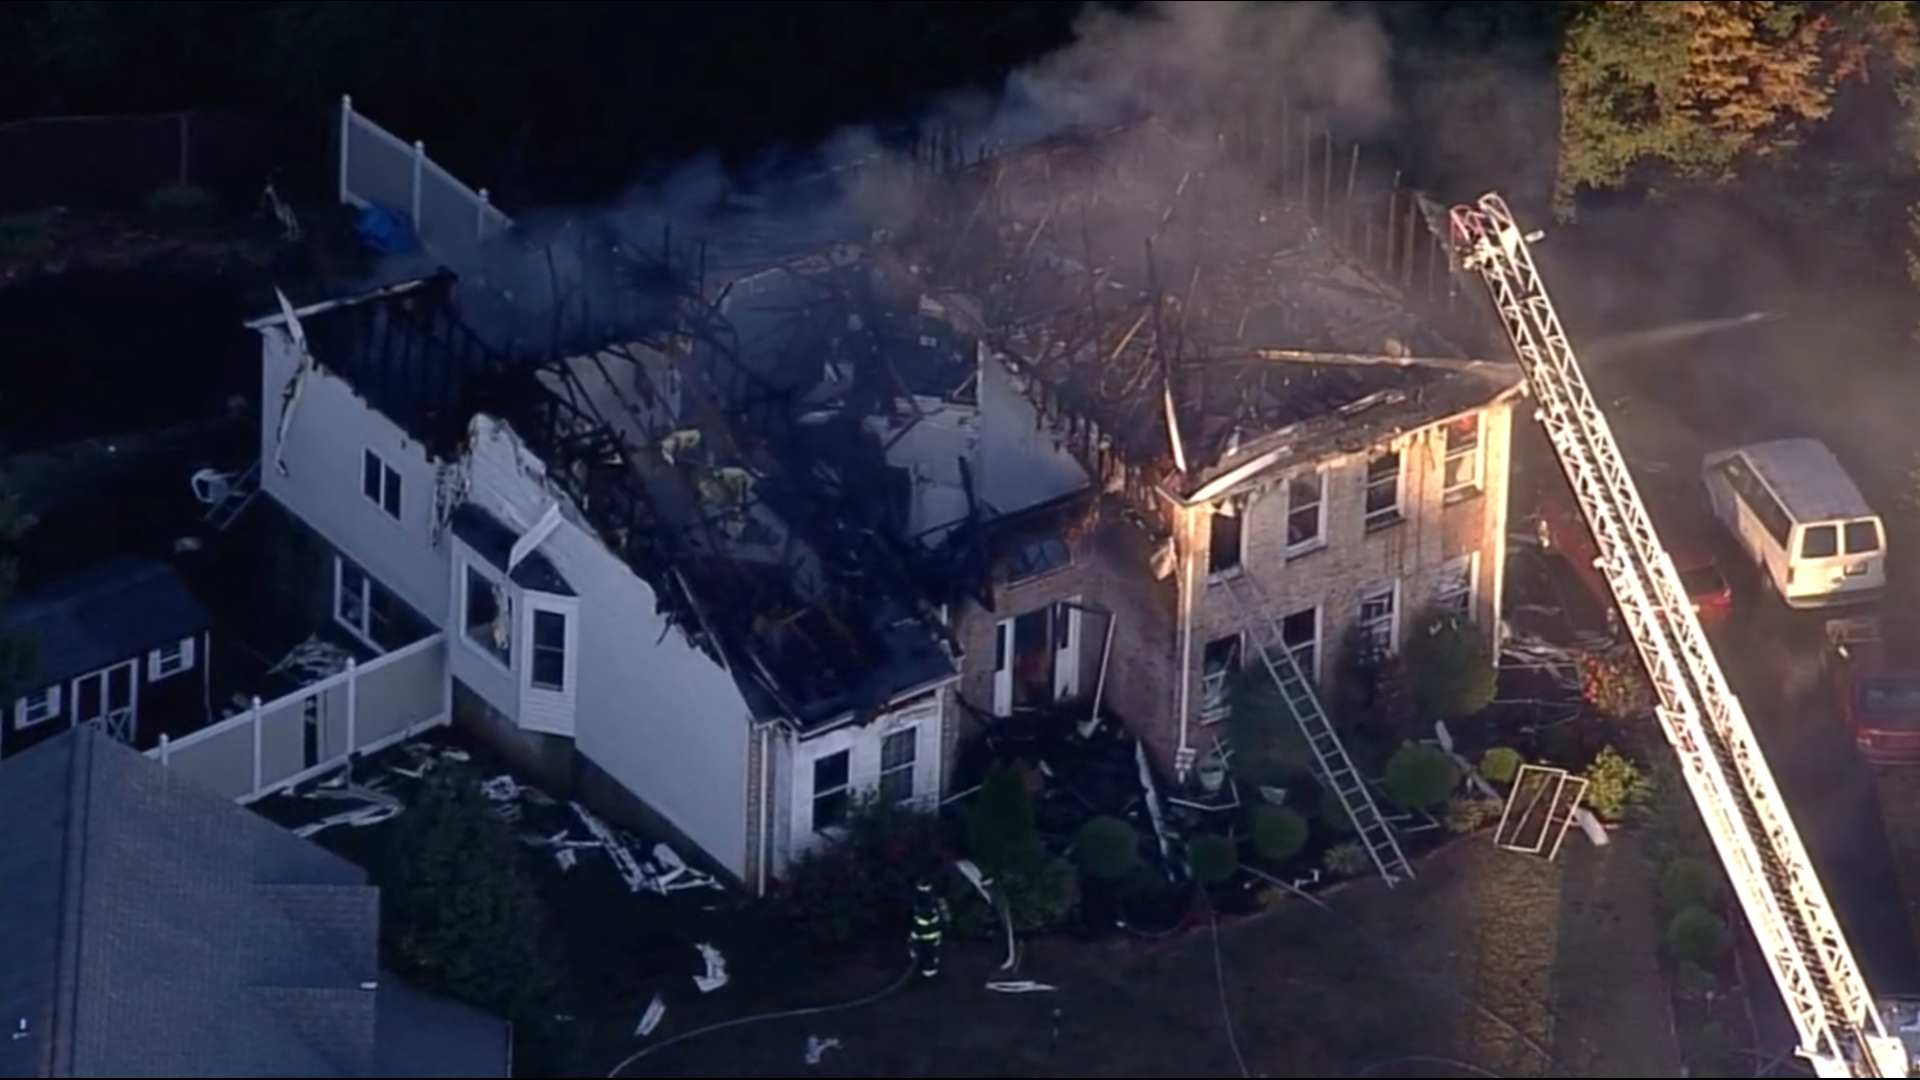 Reports indicate four to five firefighters were injured in fire in the 10000 Block of Chamberlain Court in Waldorf.